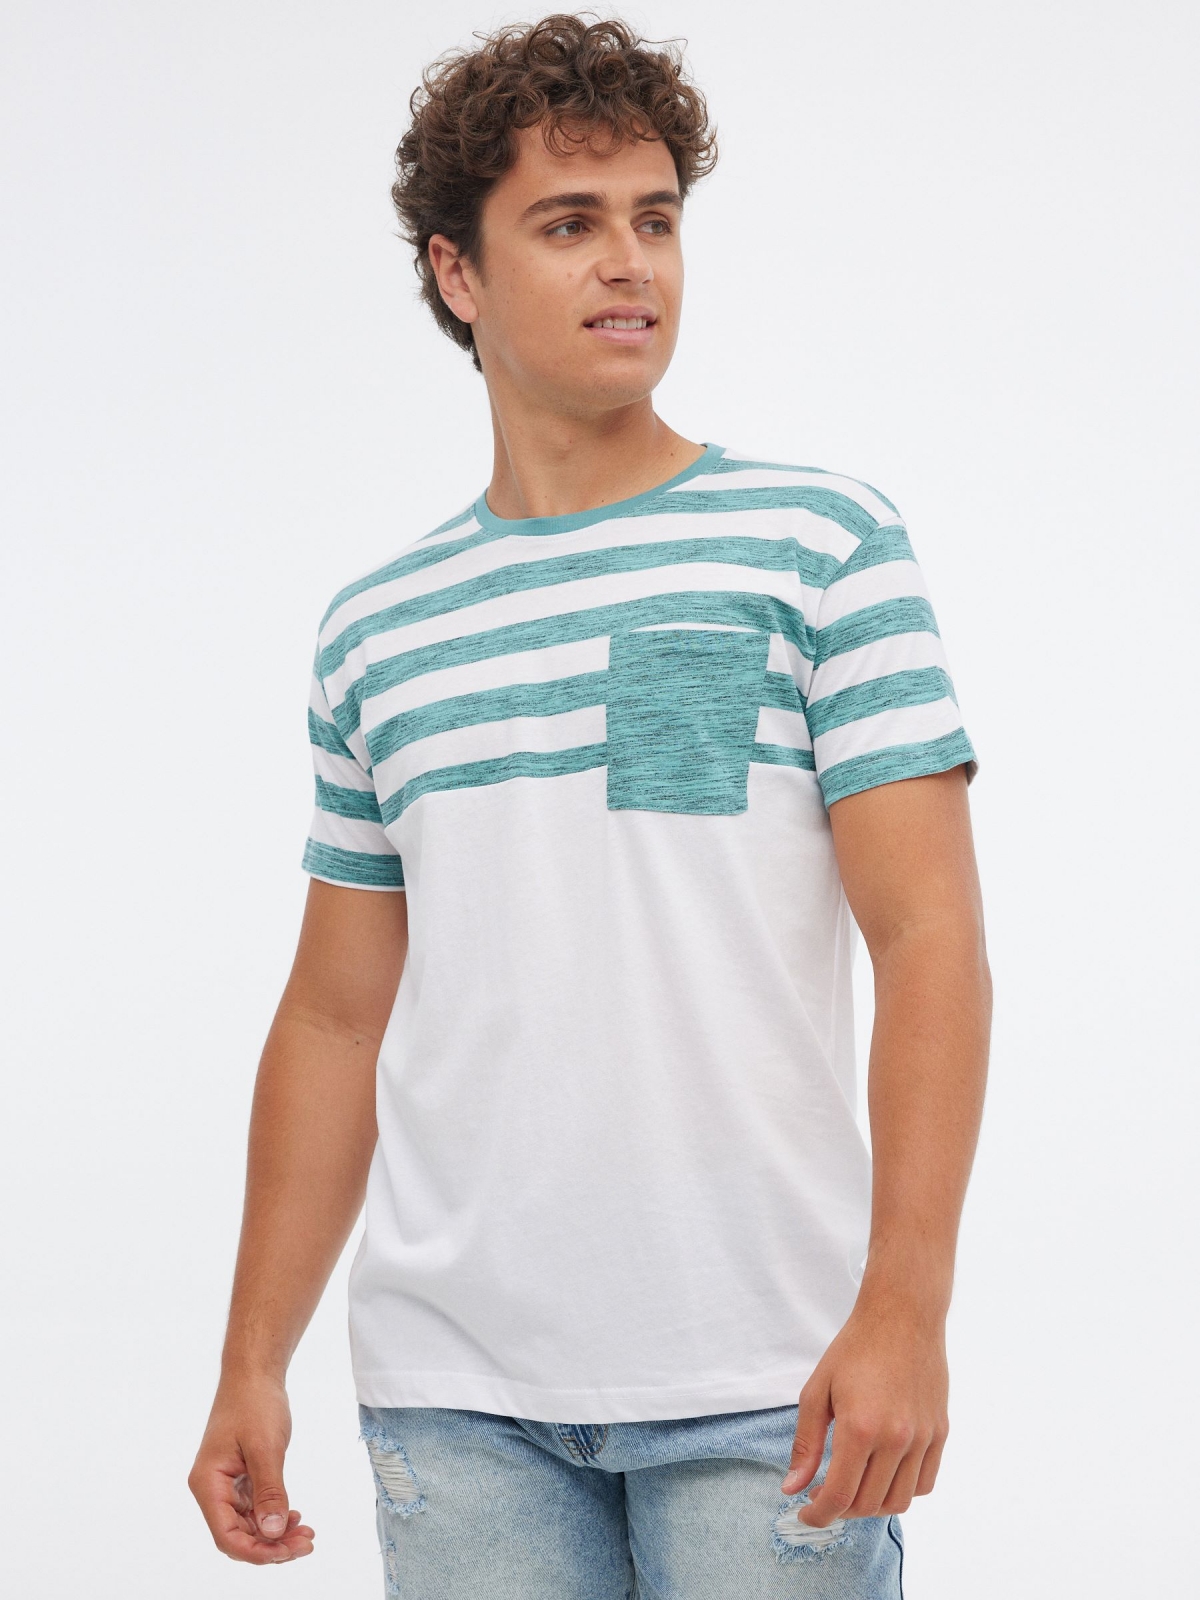 Striped T-shirt with pocket green middle front view